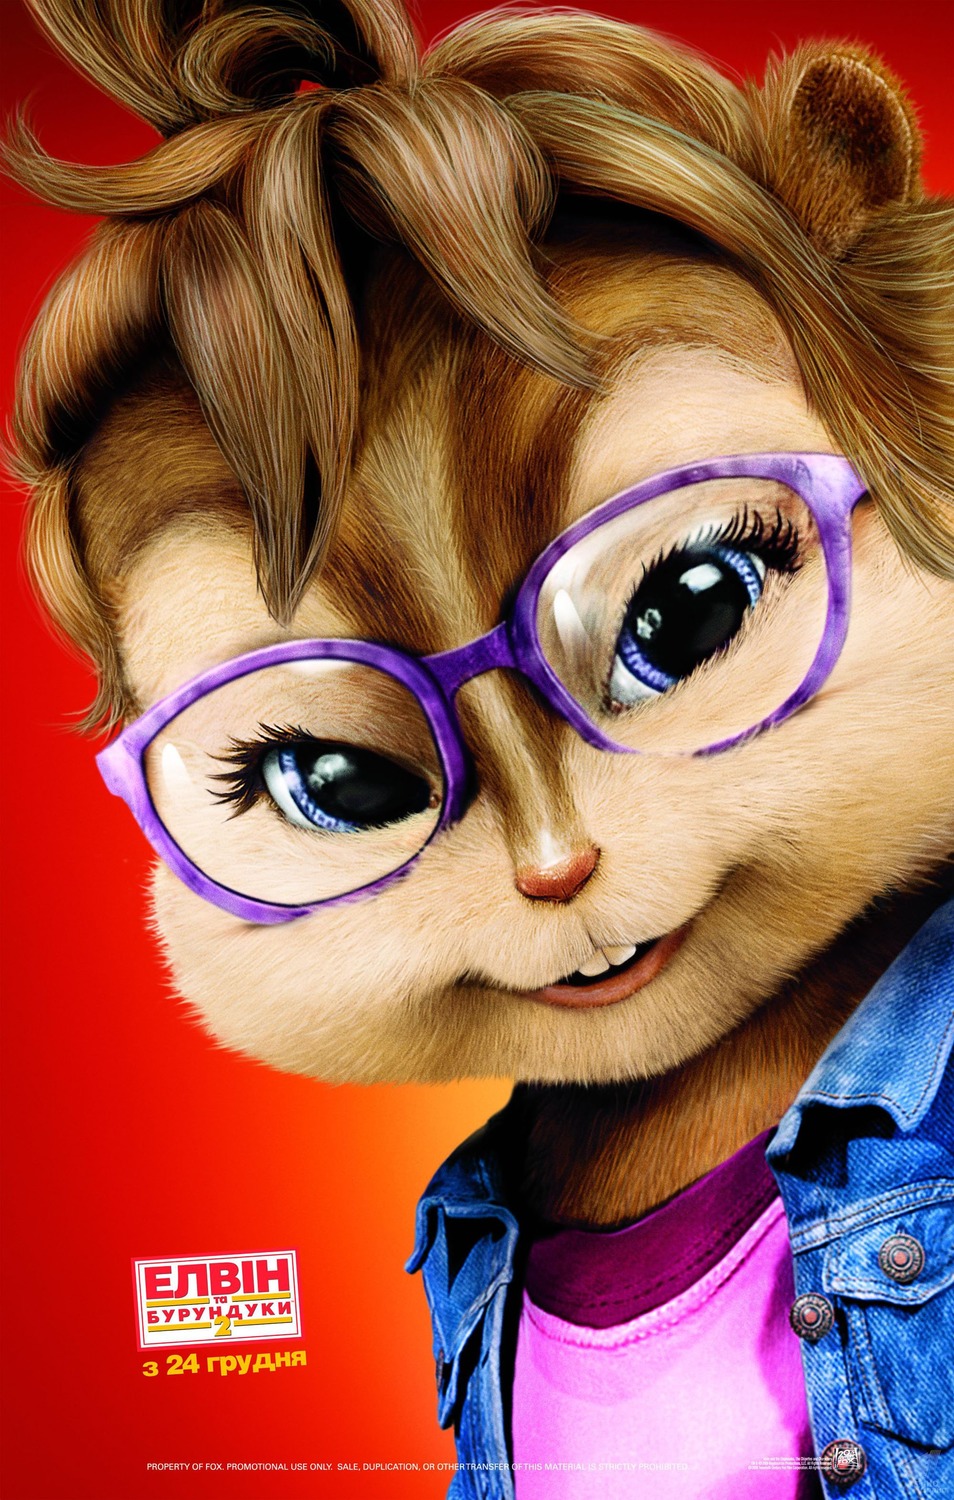 Extra Large Movie Poster Image for Alvin and the Chipmunks: The Squeakquel (#12 of 14)